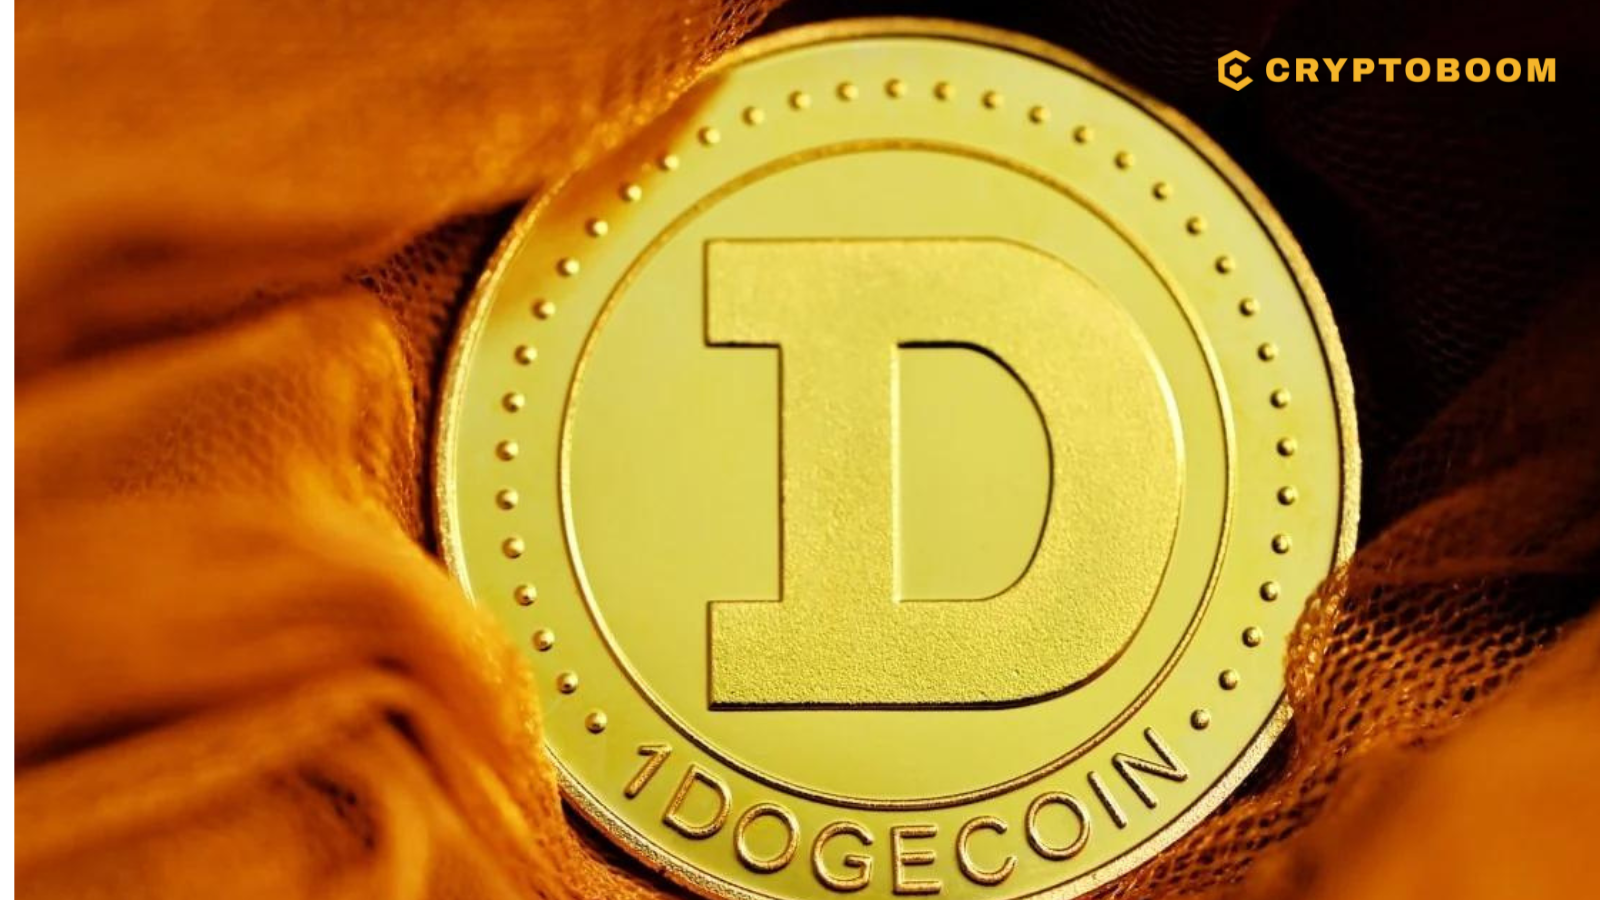 Dogecoin (DOGE): Will the Memecoin Take Flight or Remain Grounded?